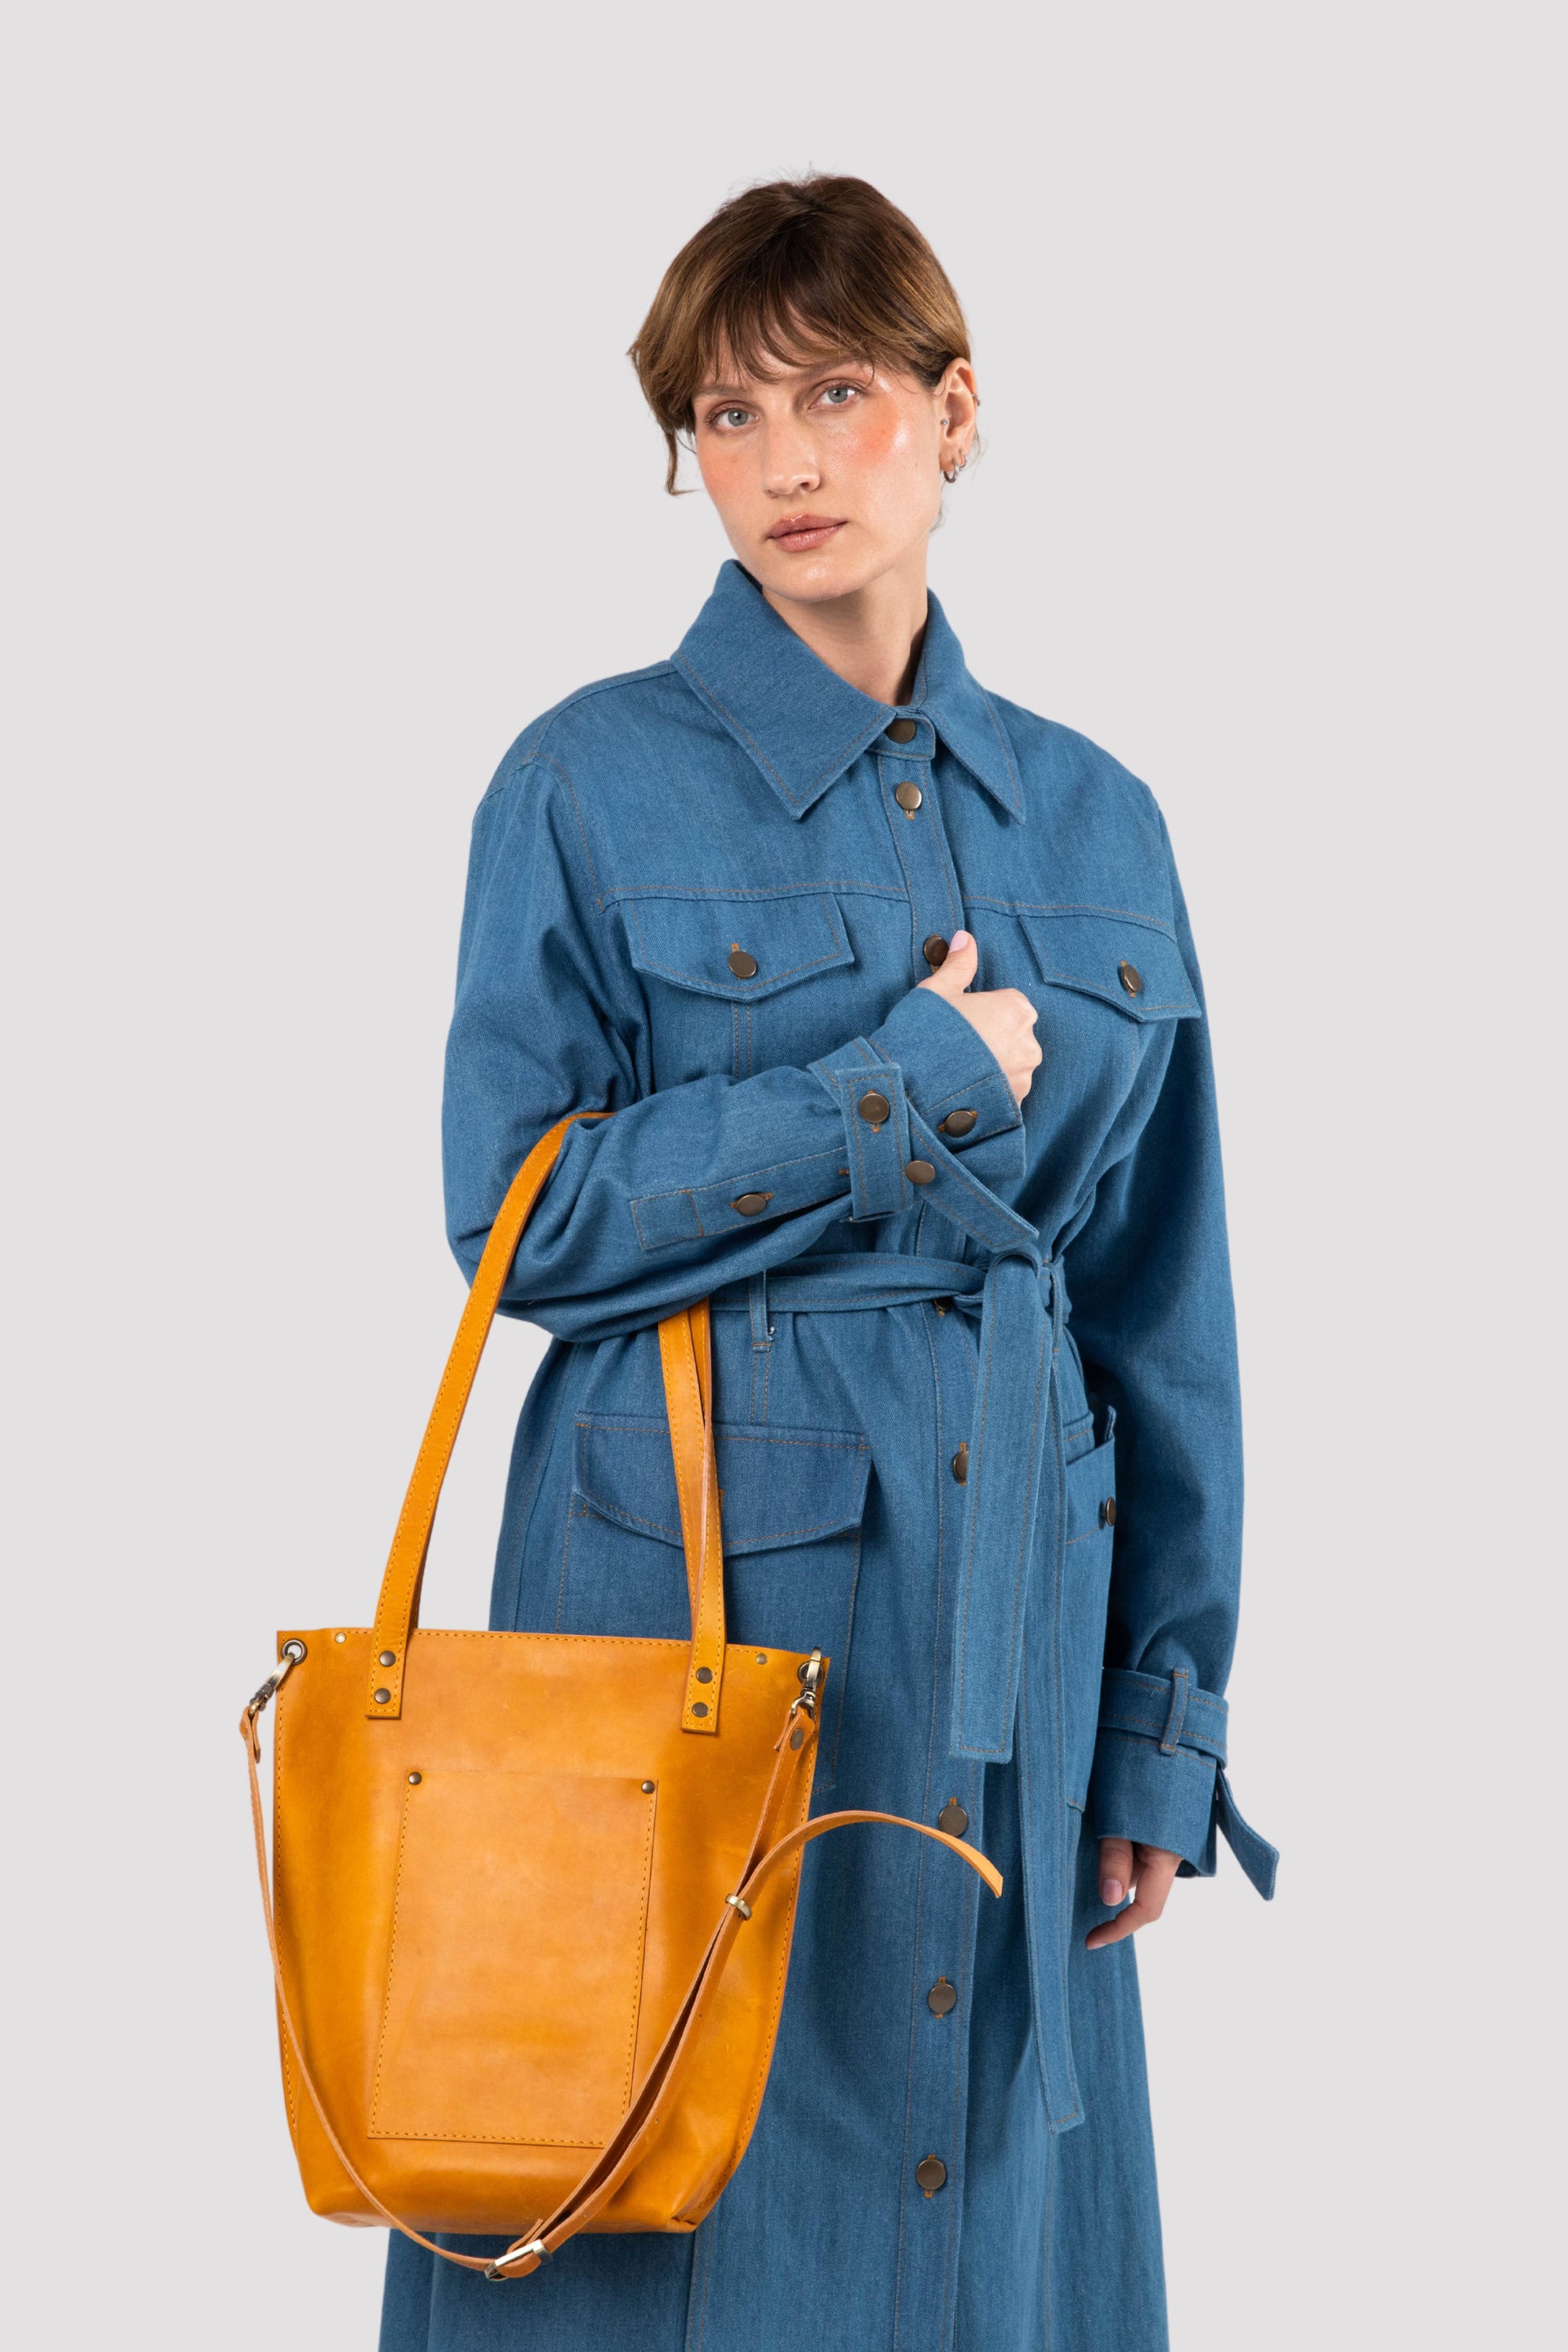 Yellow leather tote bag